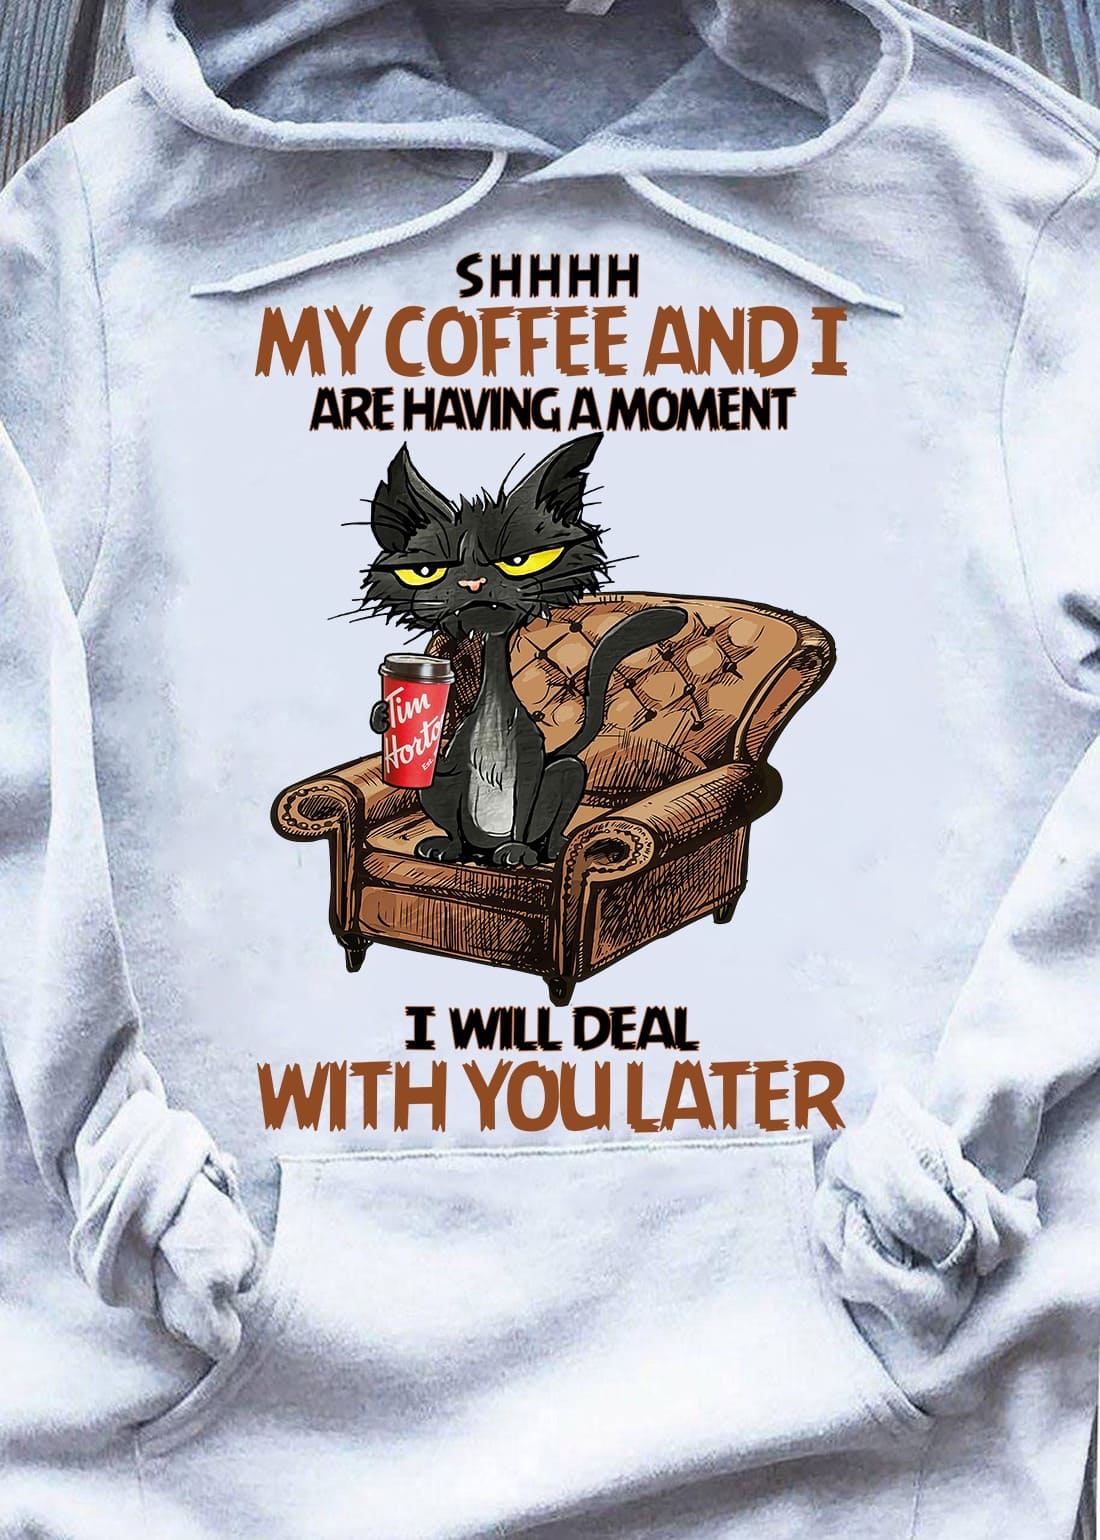 My coffee and I are having a moment I will deal with you later - Black cat drinking coffee